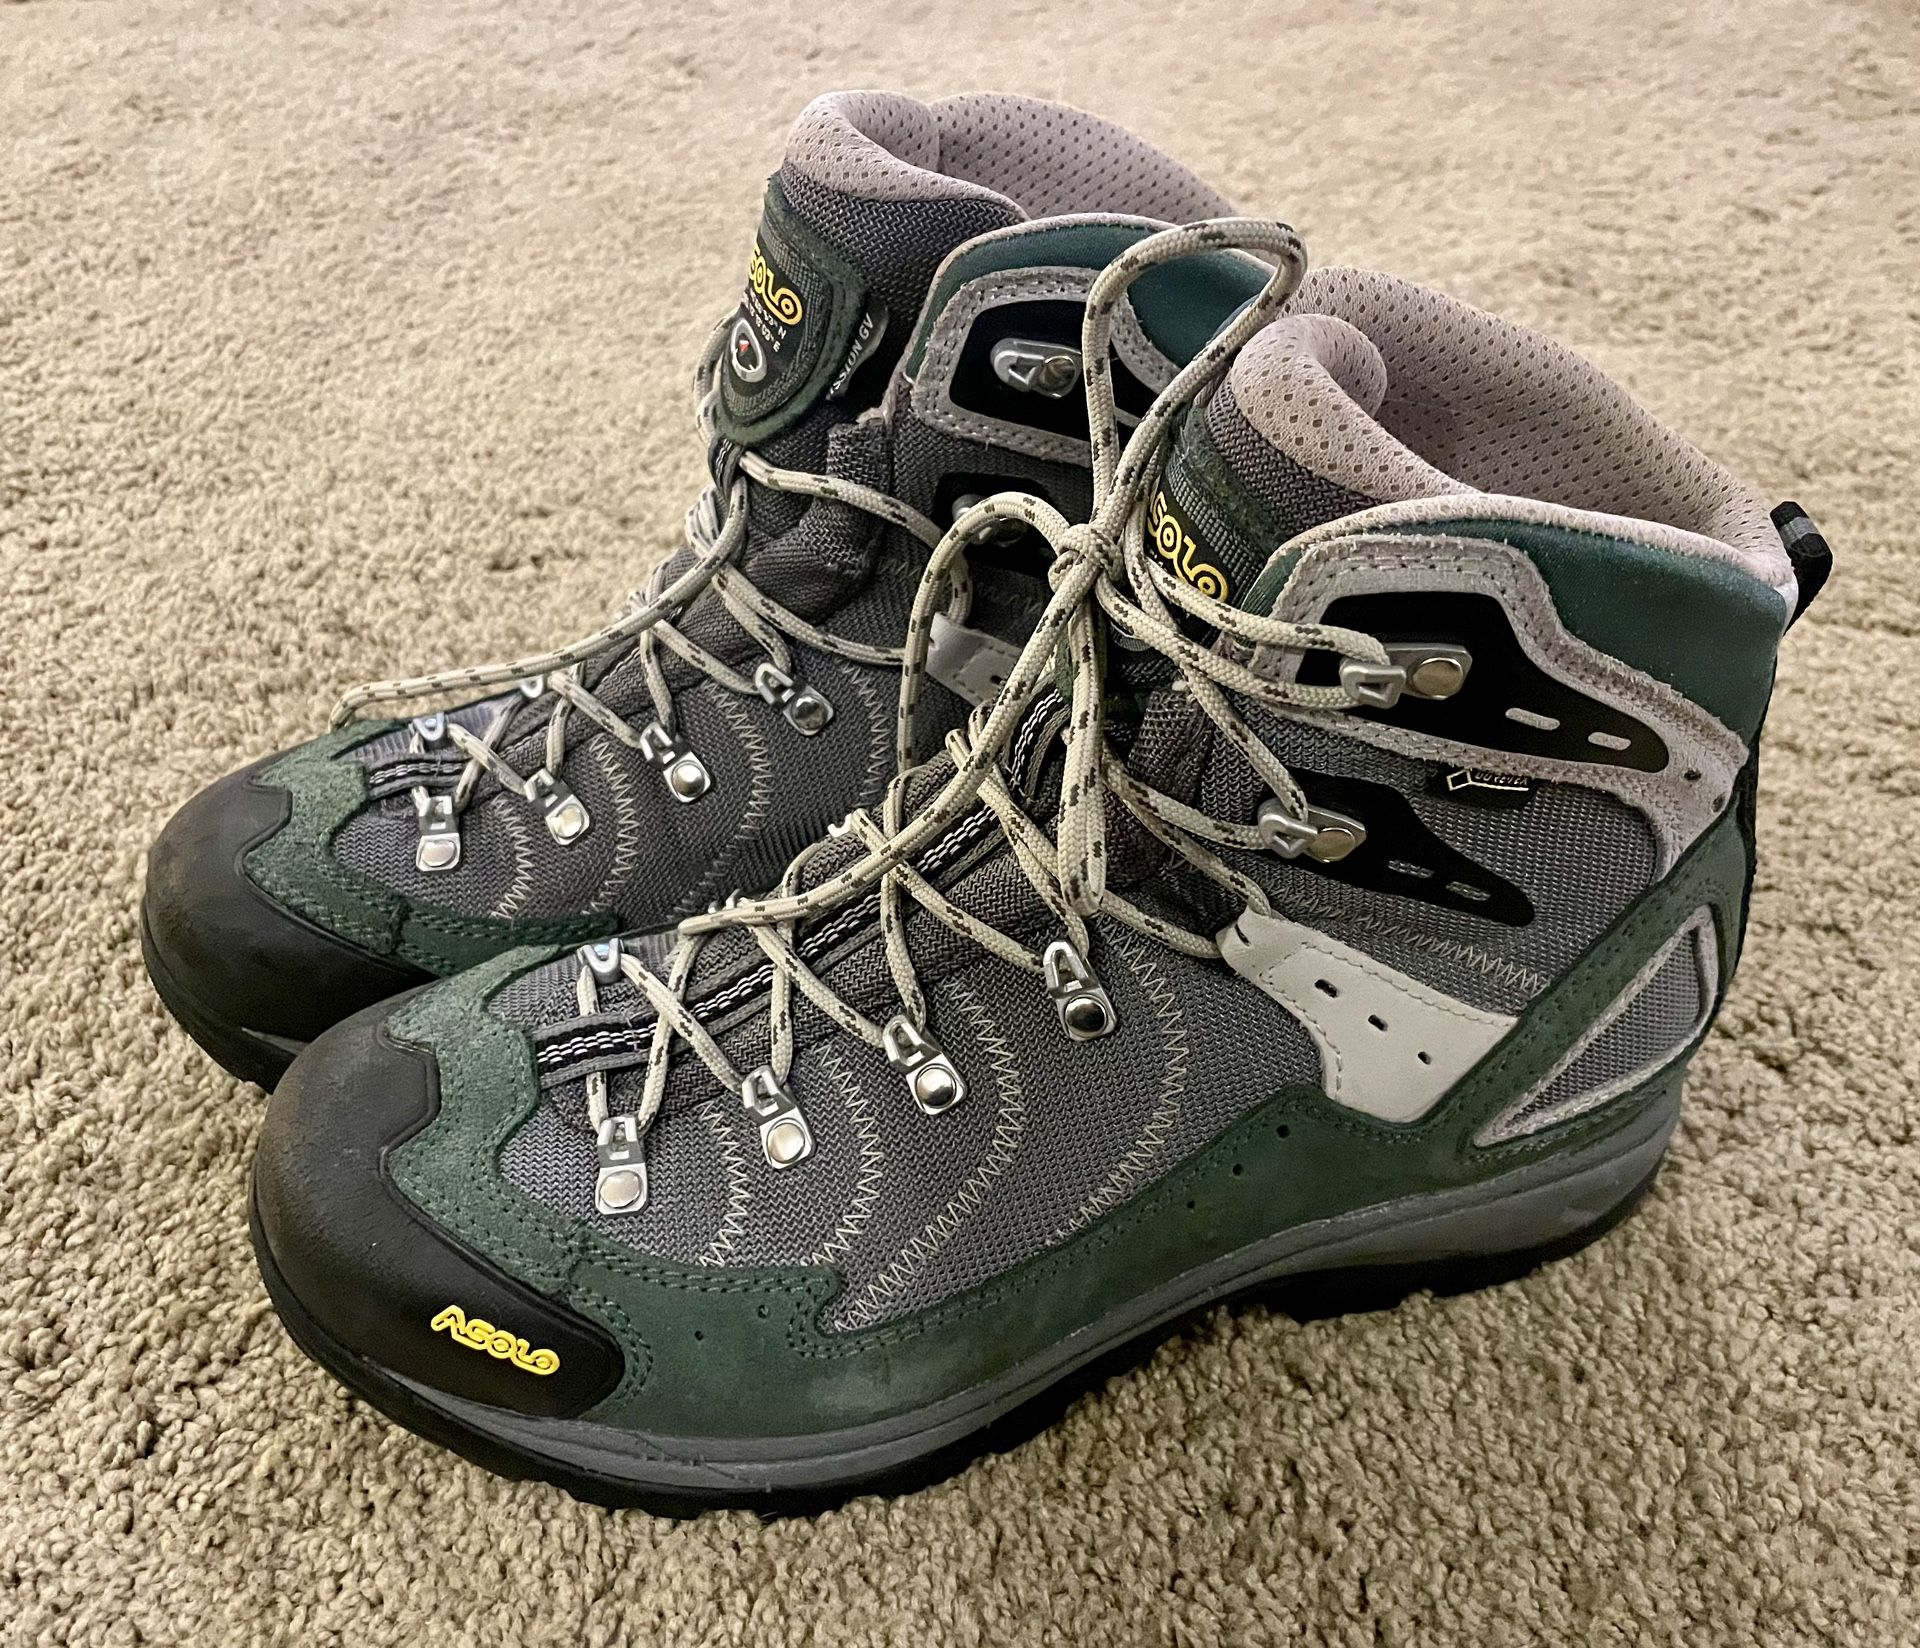 ASOLO Women’s Hiking Boots